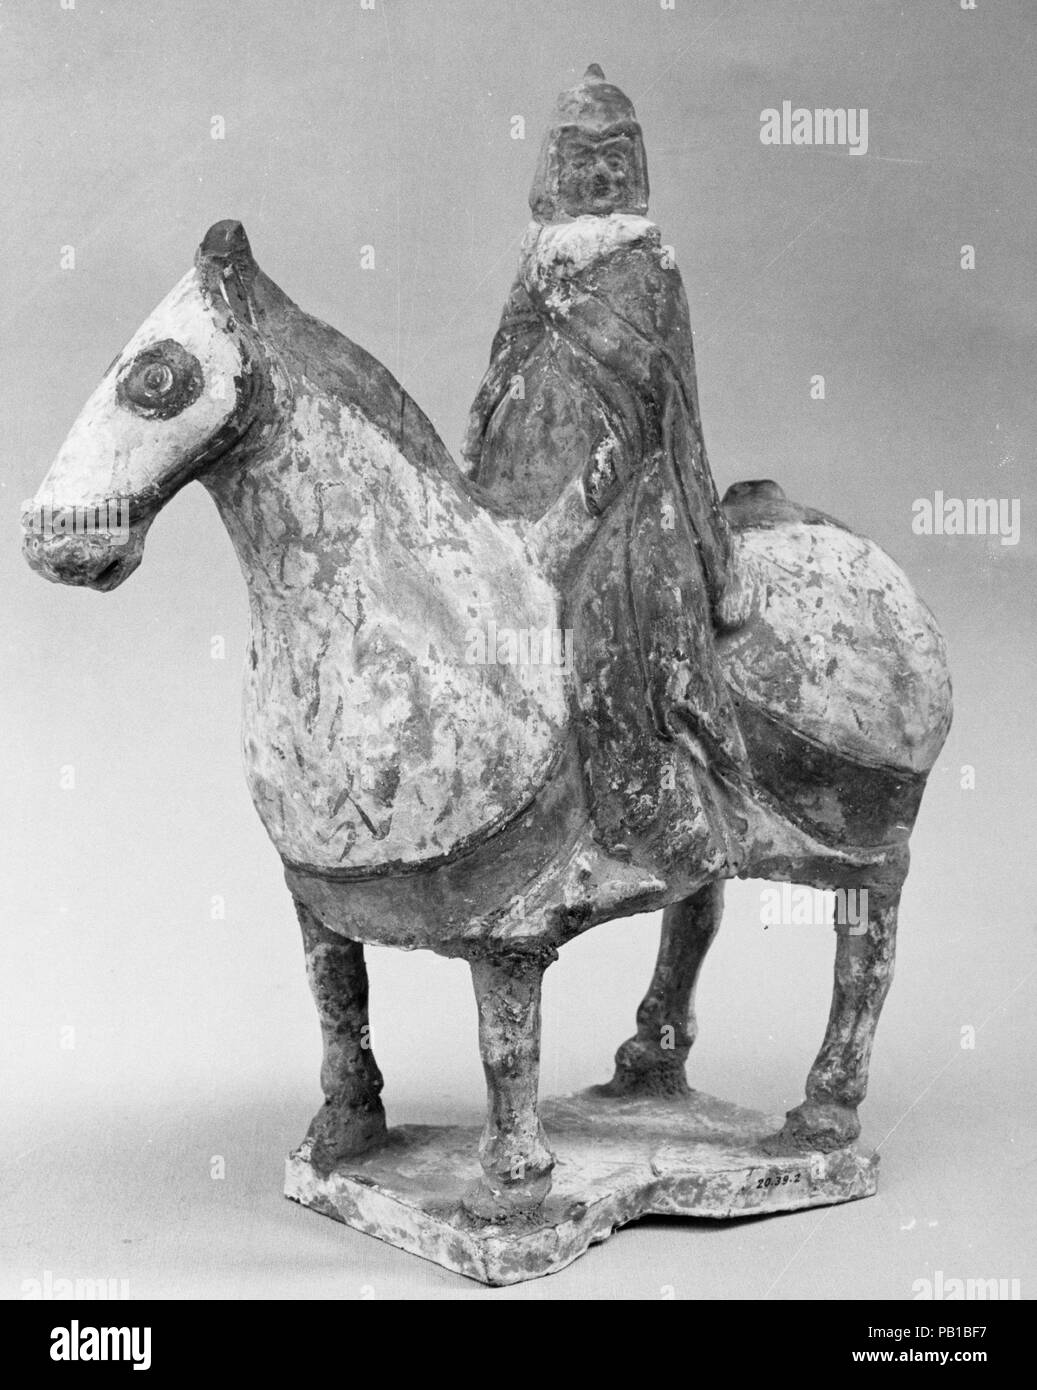 Figure of an Equestrian Soldier. Culture: China. Dimensions: H. 8 1/4 in. (21 cm); L. 7 1/2 in. (19.1 cm). Date: 5th-6th century. Museum: Metropolitan Museum of Art, New York, USA. Stock Photo